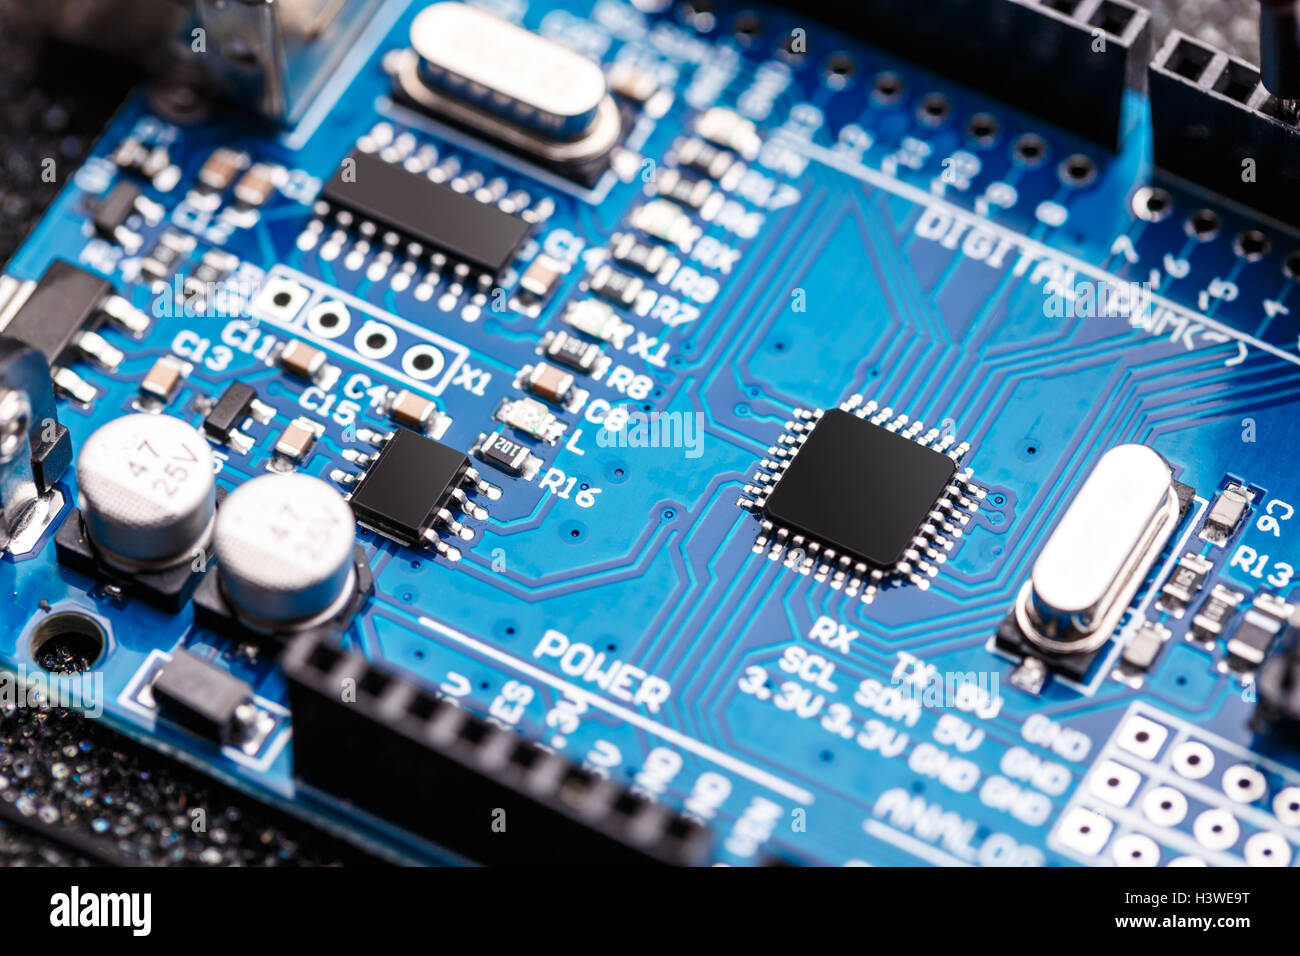 Integrated semiconductor microchip/ microprocessor on blue circuit board Stock Photo